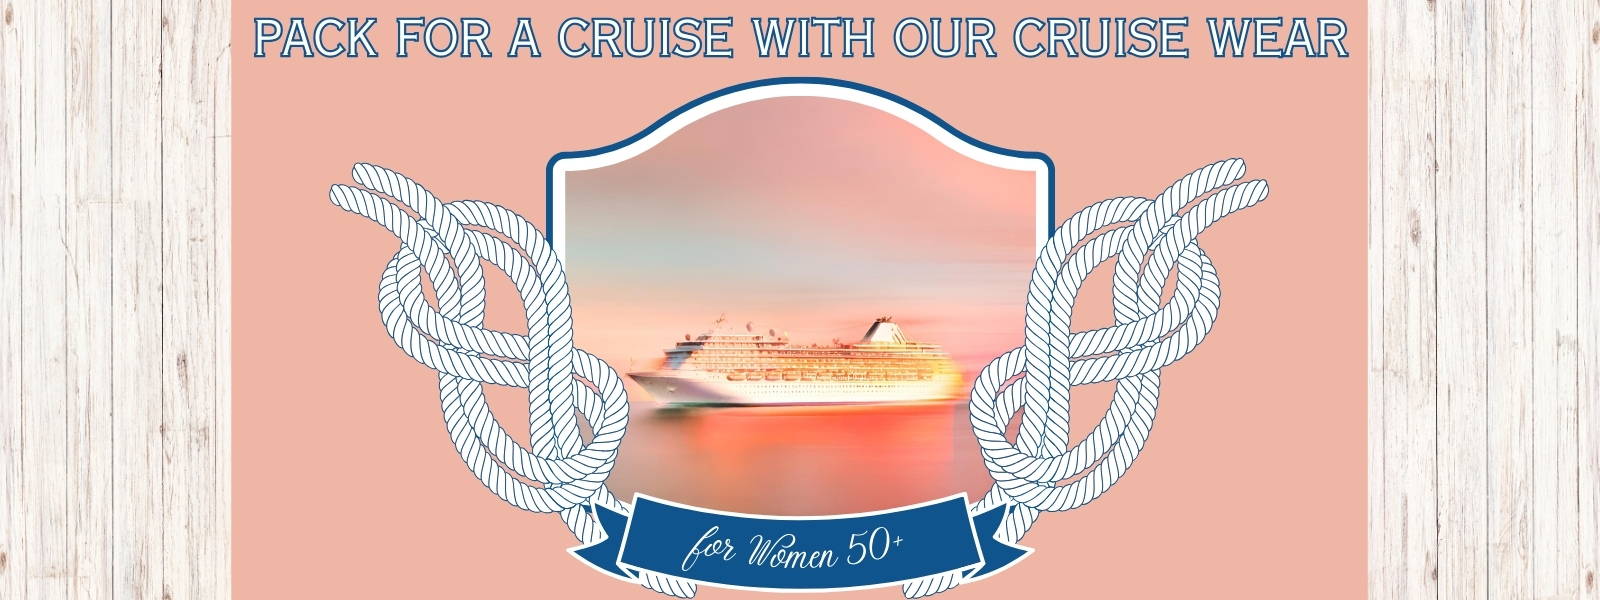 Pack for a Cruise with Our Cruise Wear for Women 50+